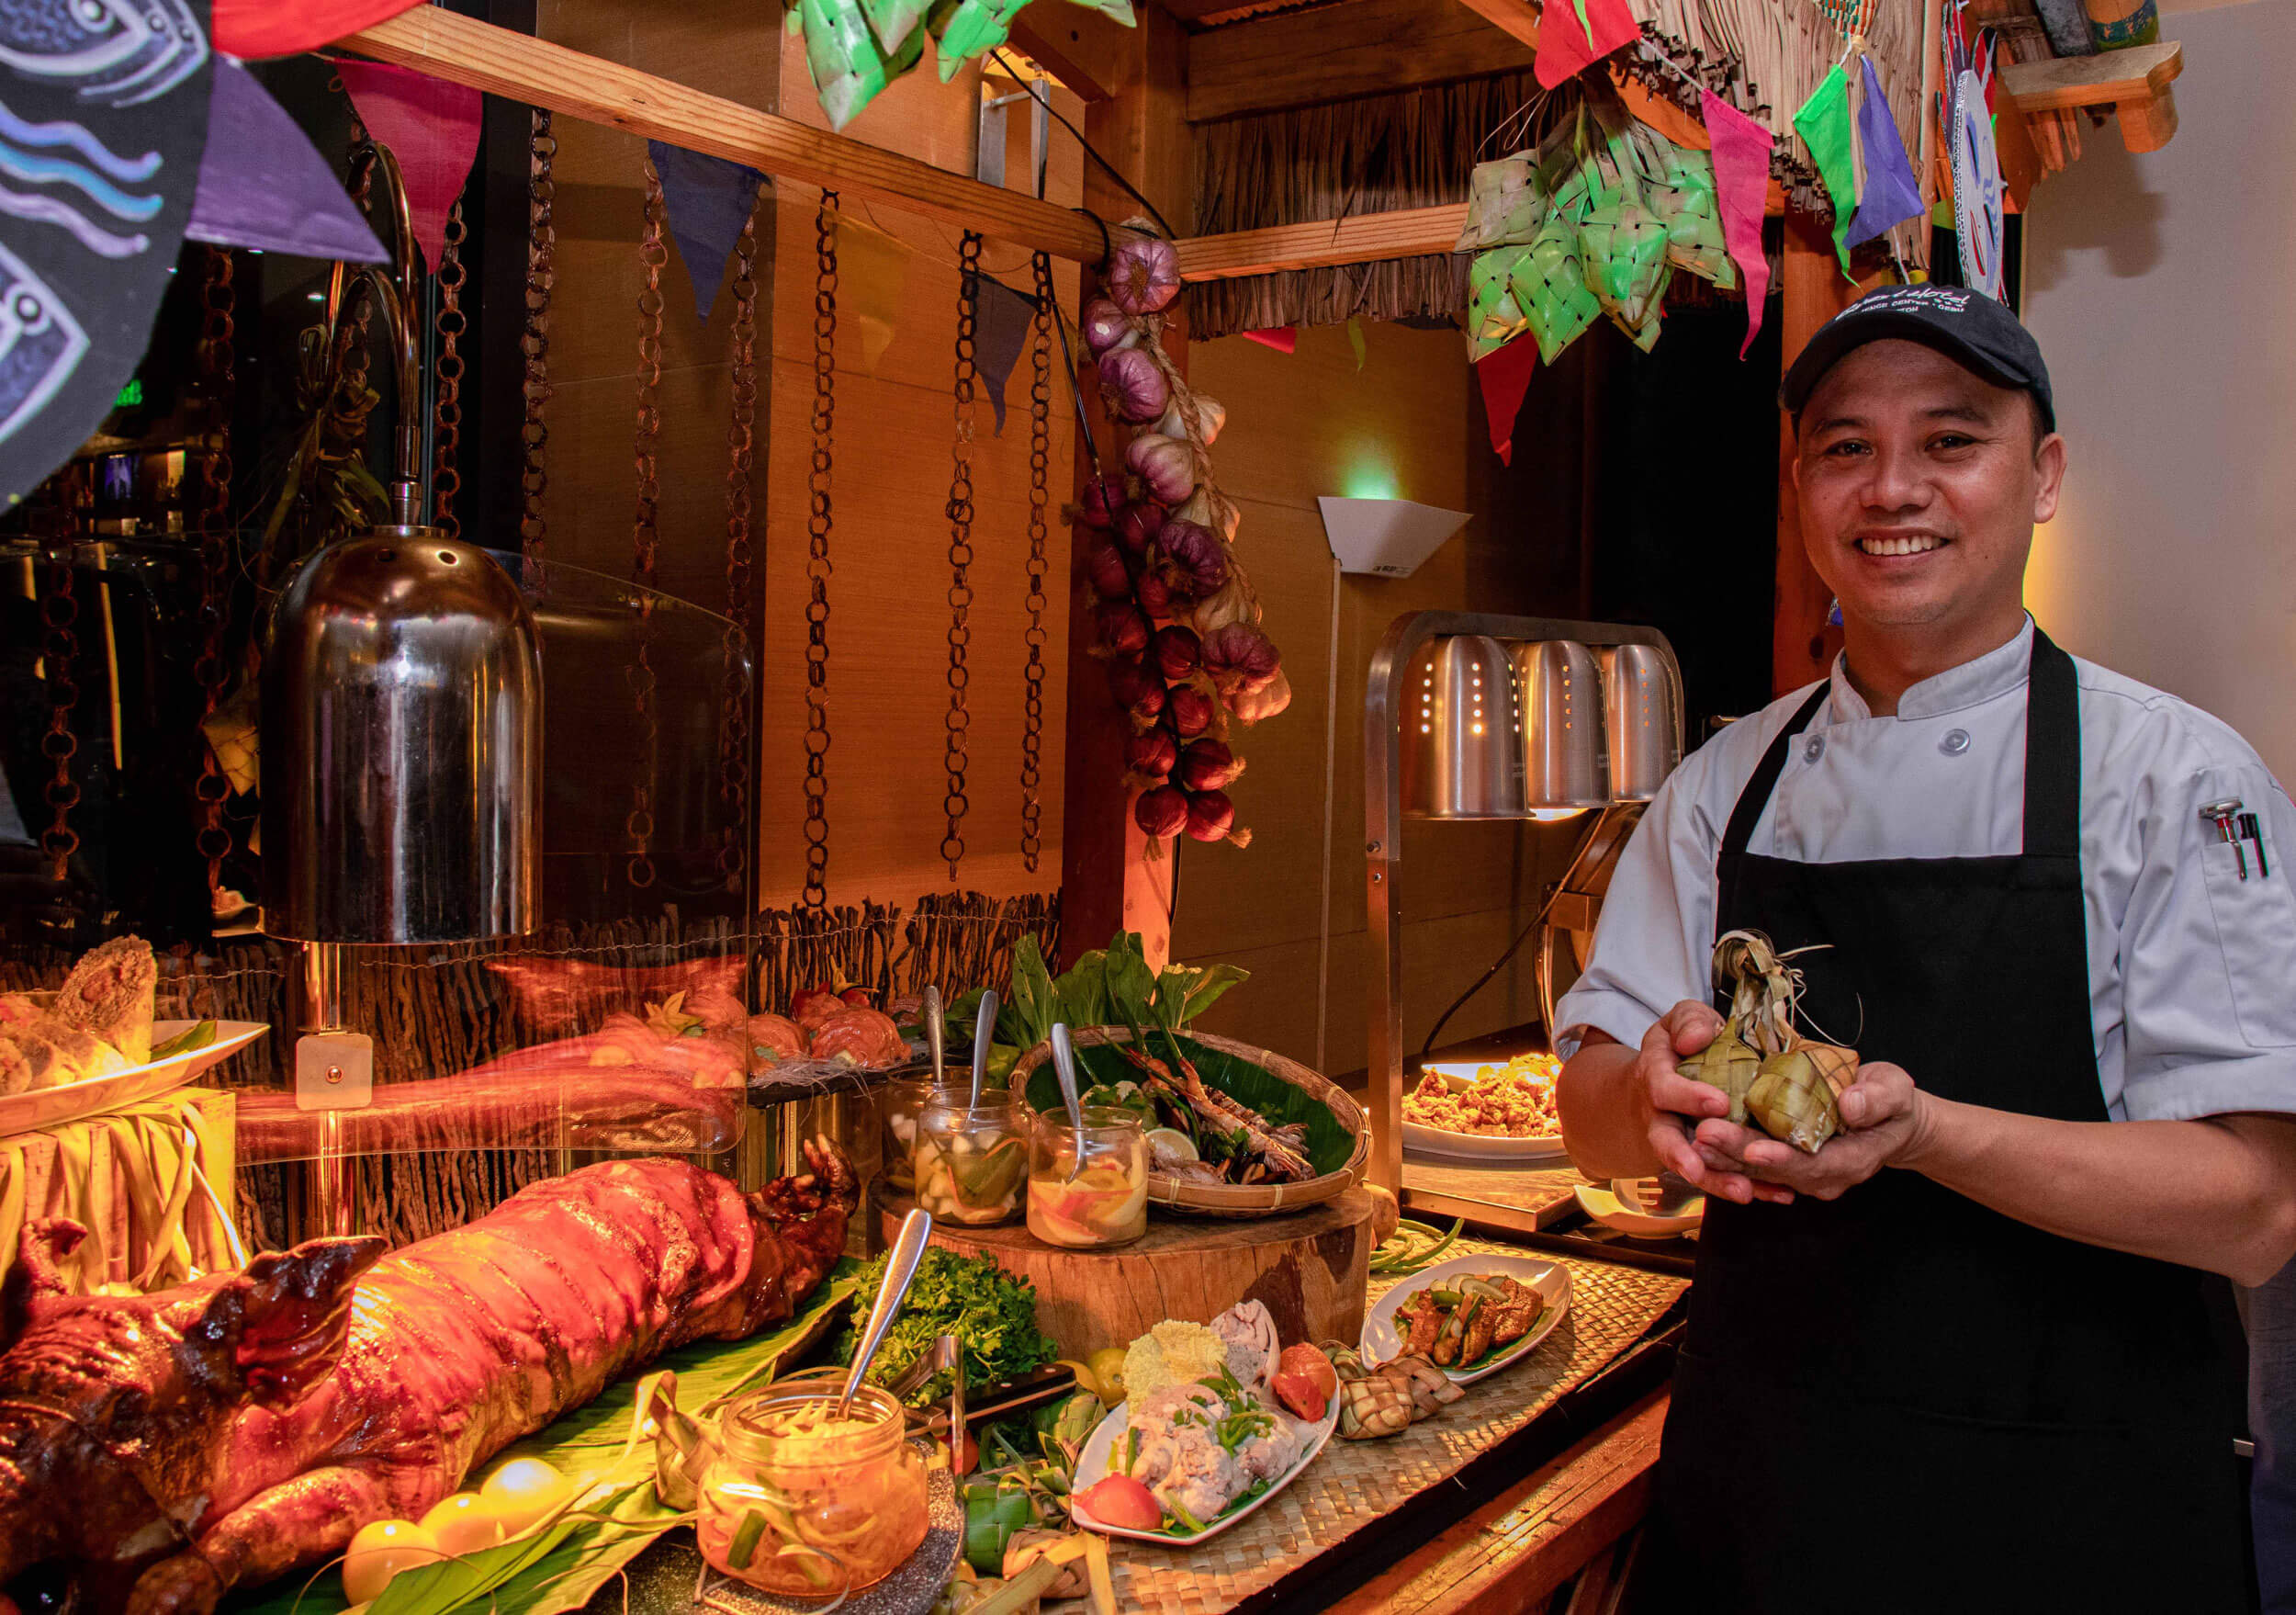 Quest Hotel Cebu’s all-day dining restaurant Pusô Bistro & Bar sets a hearty Cebuano spread of seafood and lechon for the Sinulog Fiesta Buffet from January 17 to 19. The Sinulog Lunch Buffet is at P850 net per person and the Sinulog Dinner Buffet is at P1,200 net per person. 